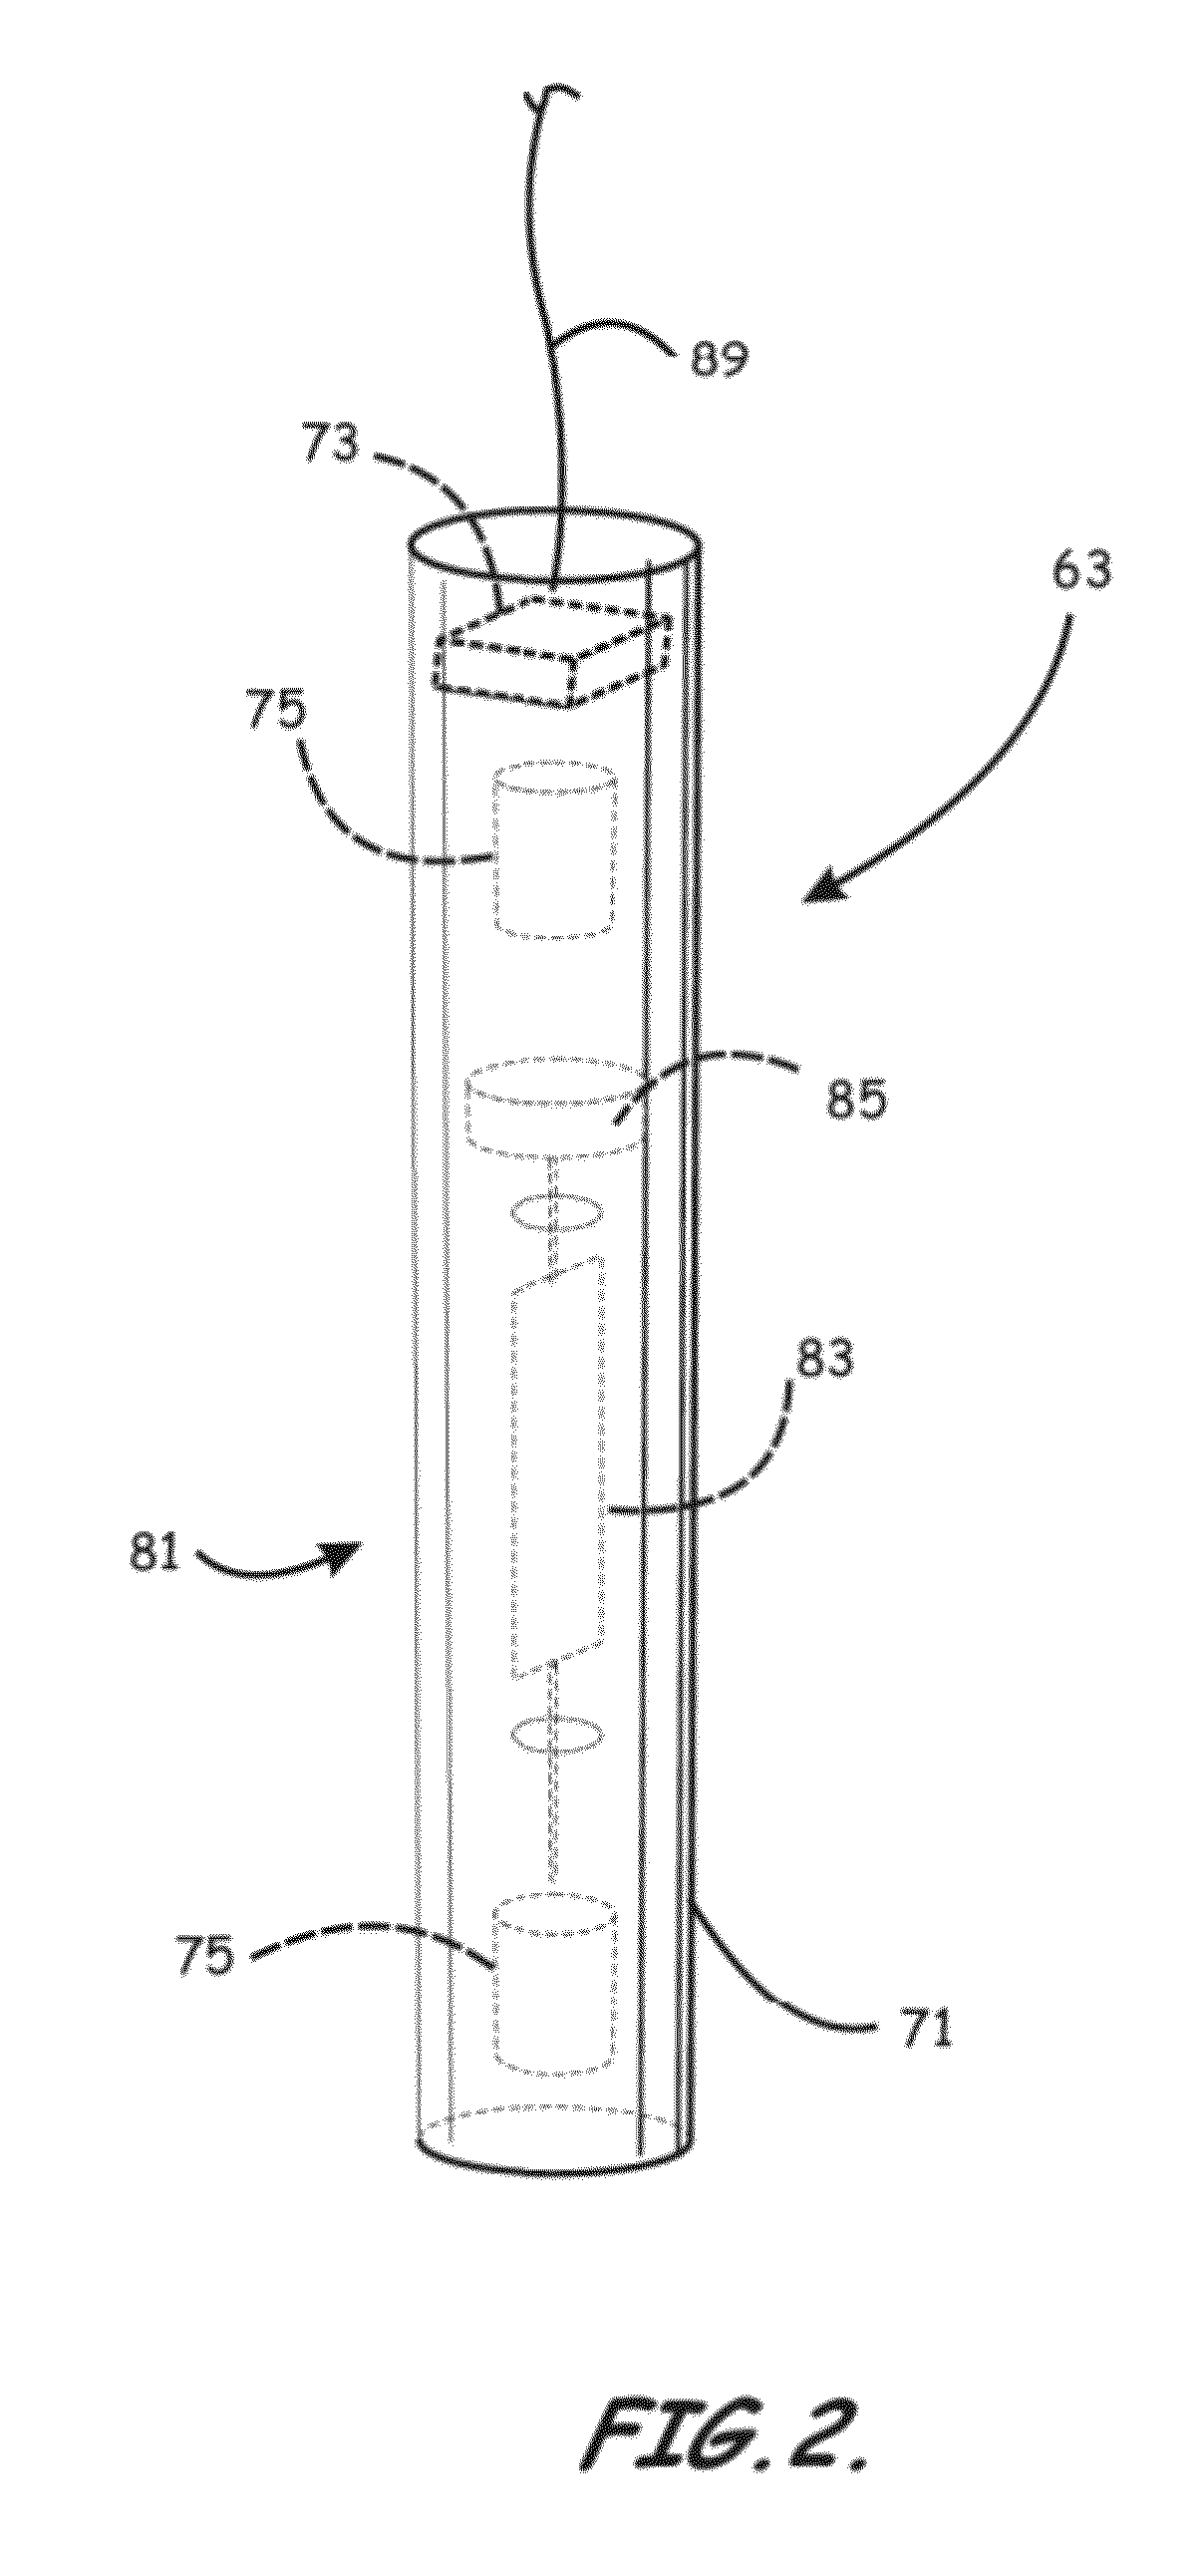 Methods of employing and using a hybrid transponder system for long-Range sensing and 3D localization